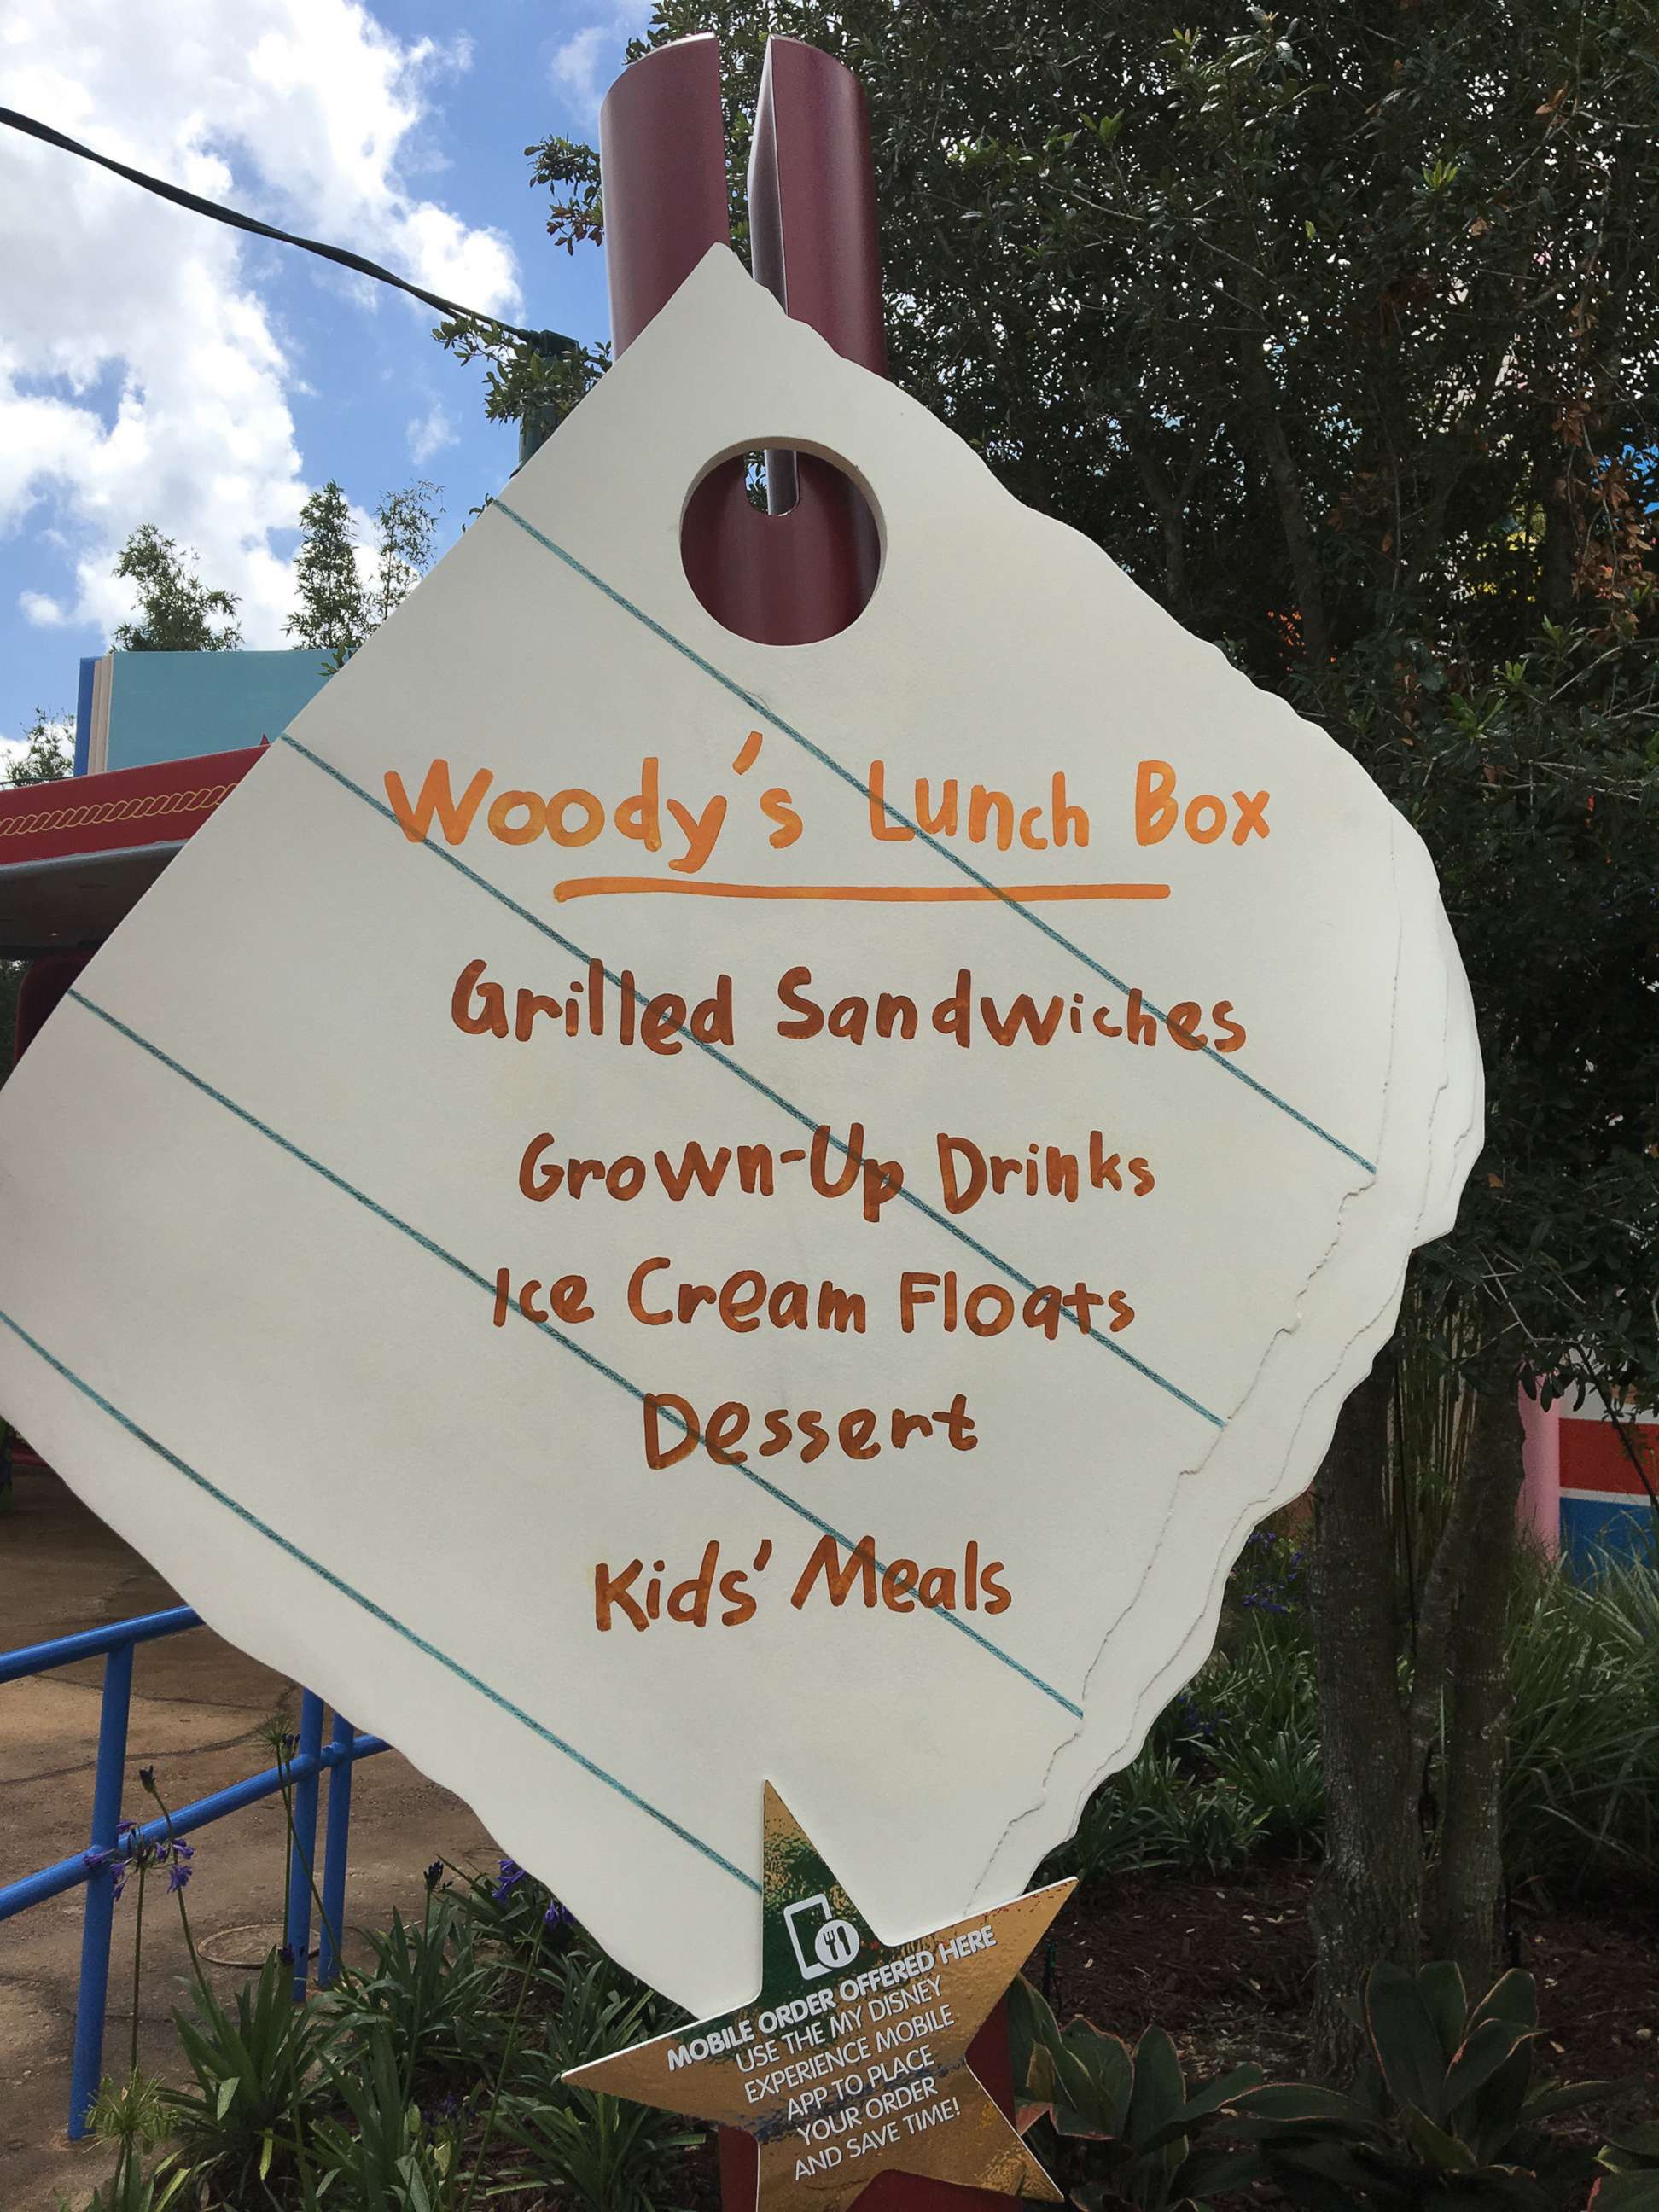 PHOTO: A sign outside Woody’s Lunch Box at Disney’s Toy Story Land at the Walt Disney World Resort in Bay Lake, Fla., near Orlando, lists food options at Woody's Lunch Box.